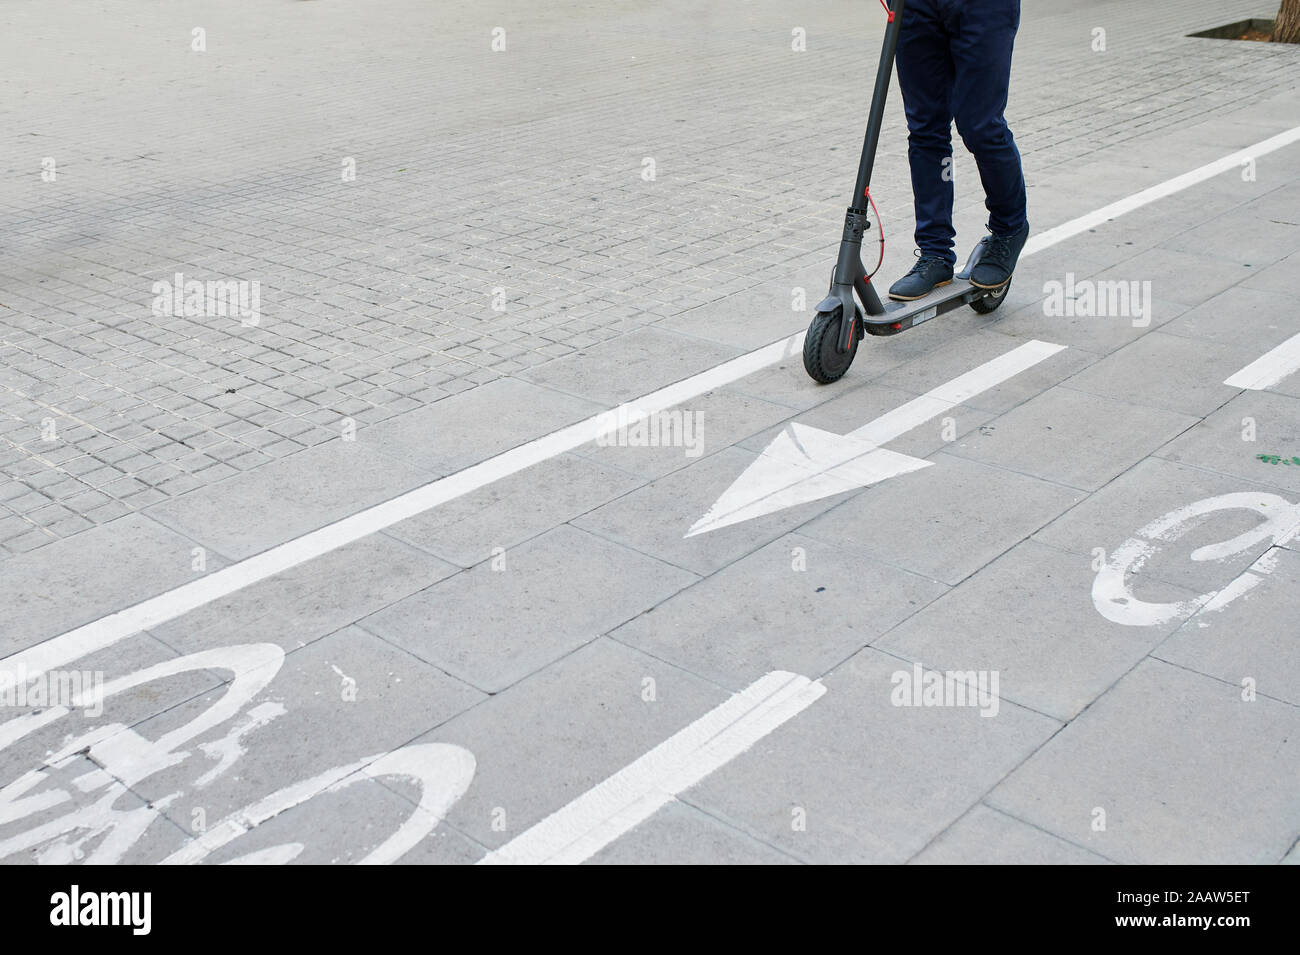 Legs of man riding e-scooter on bicycle lane in the city Stock Photo